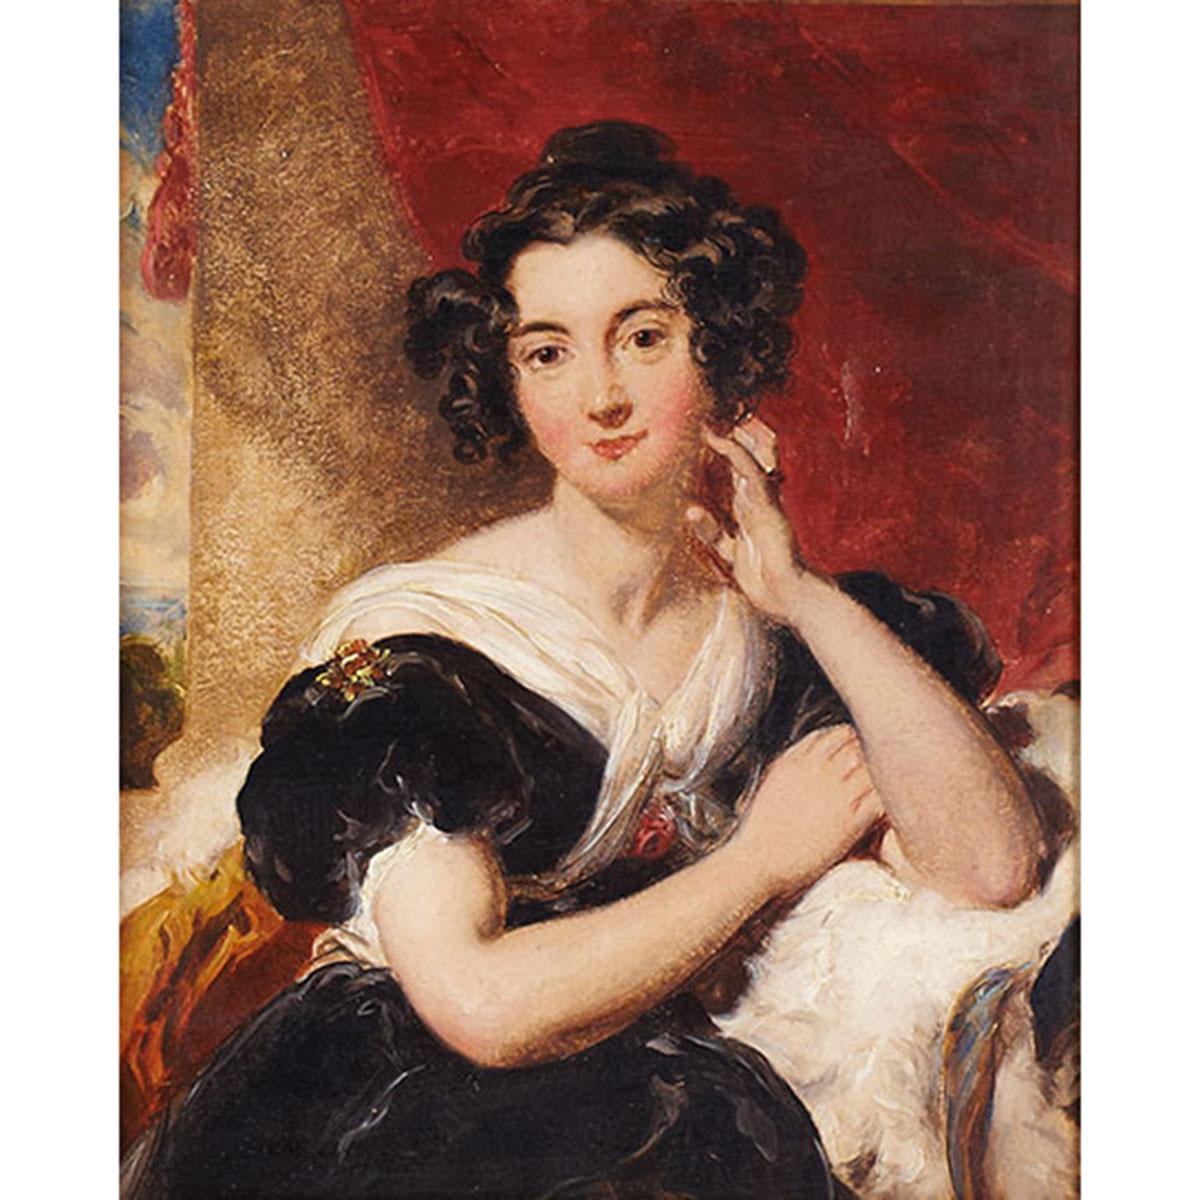 Attributed to Sir Thomas Lawrence (1769-1830)